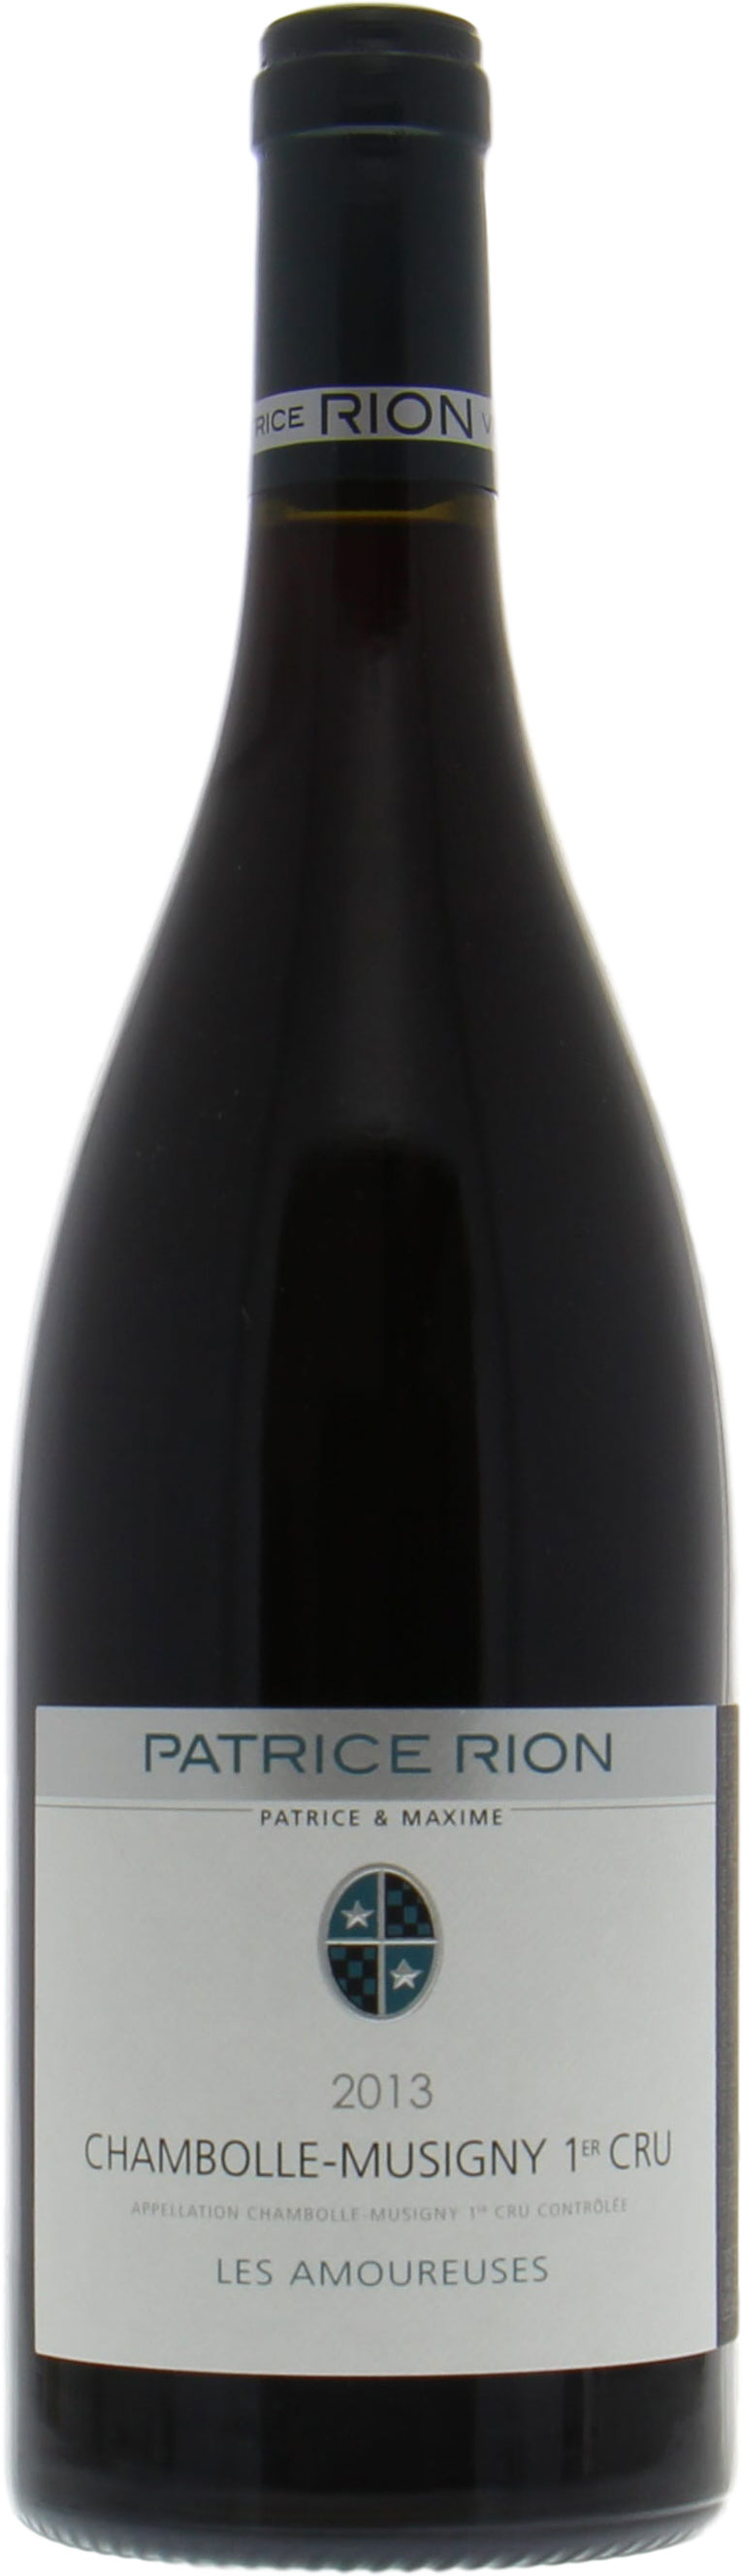 Patrice Rion - Chambolle Musigny 1er Cru les Amoureuses 2013